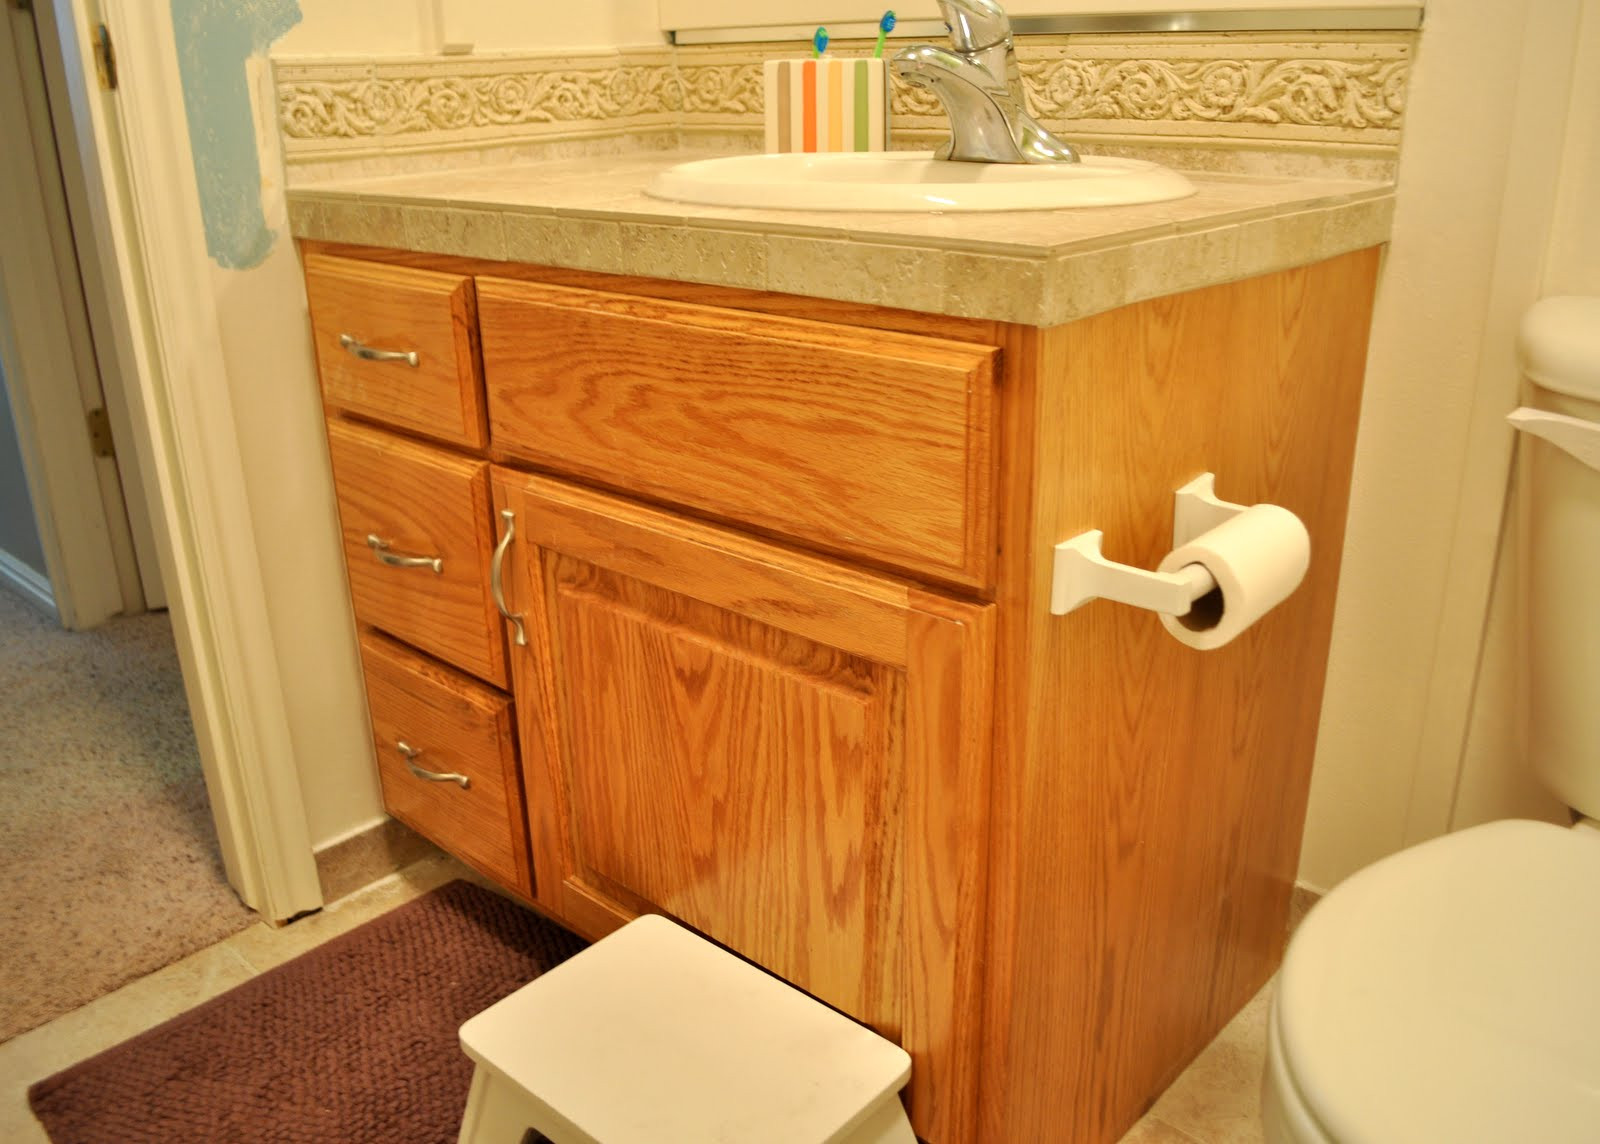 Oak Bathroom Cabinets
 Sassy Sanctuary Bathroom Cabinet Before and After